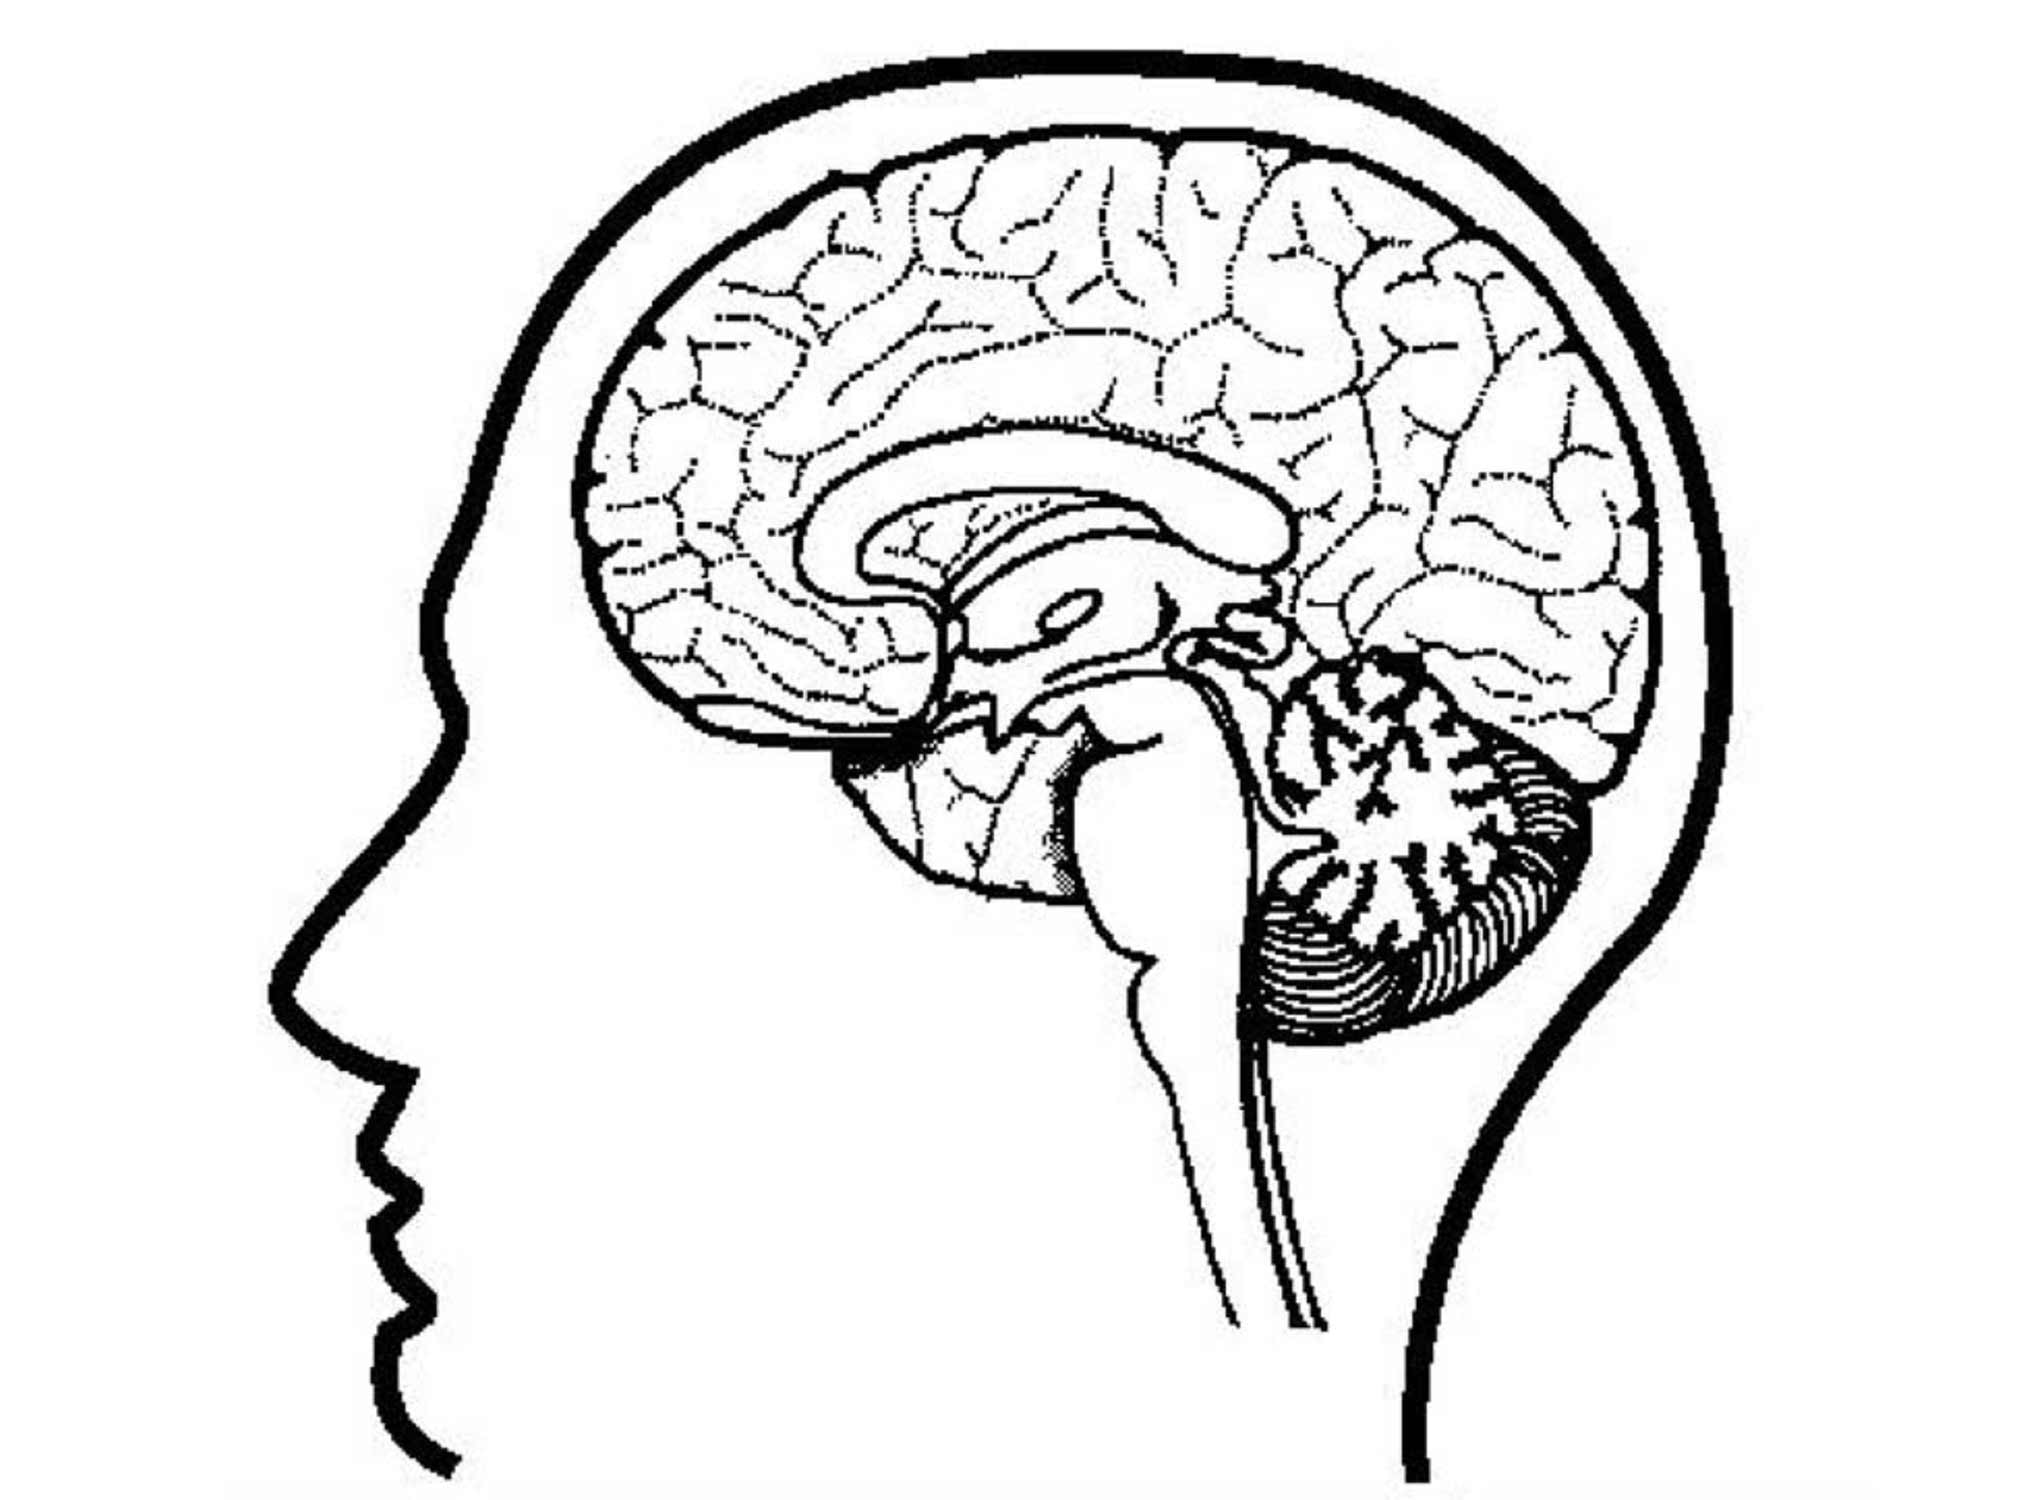 Psychology and Brain Sciences Puzzles + Coloring Pages – Science Fest